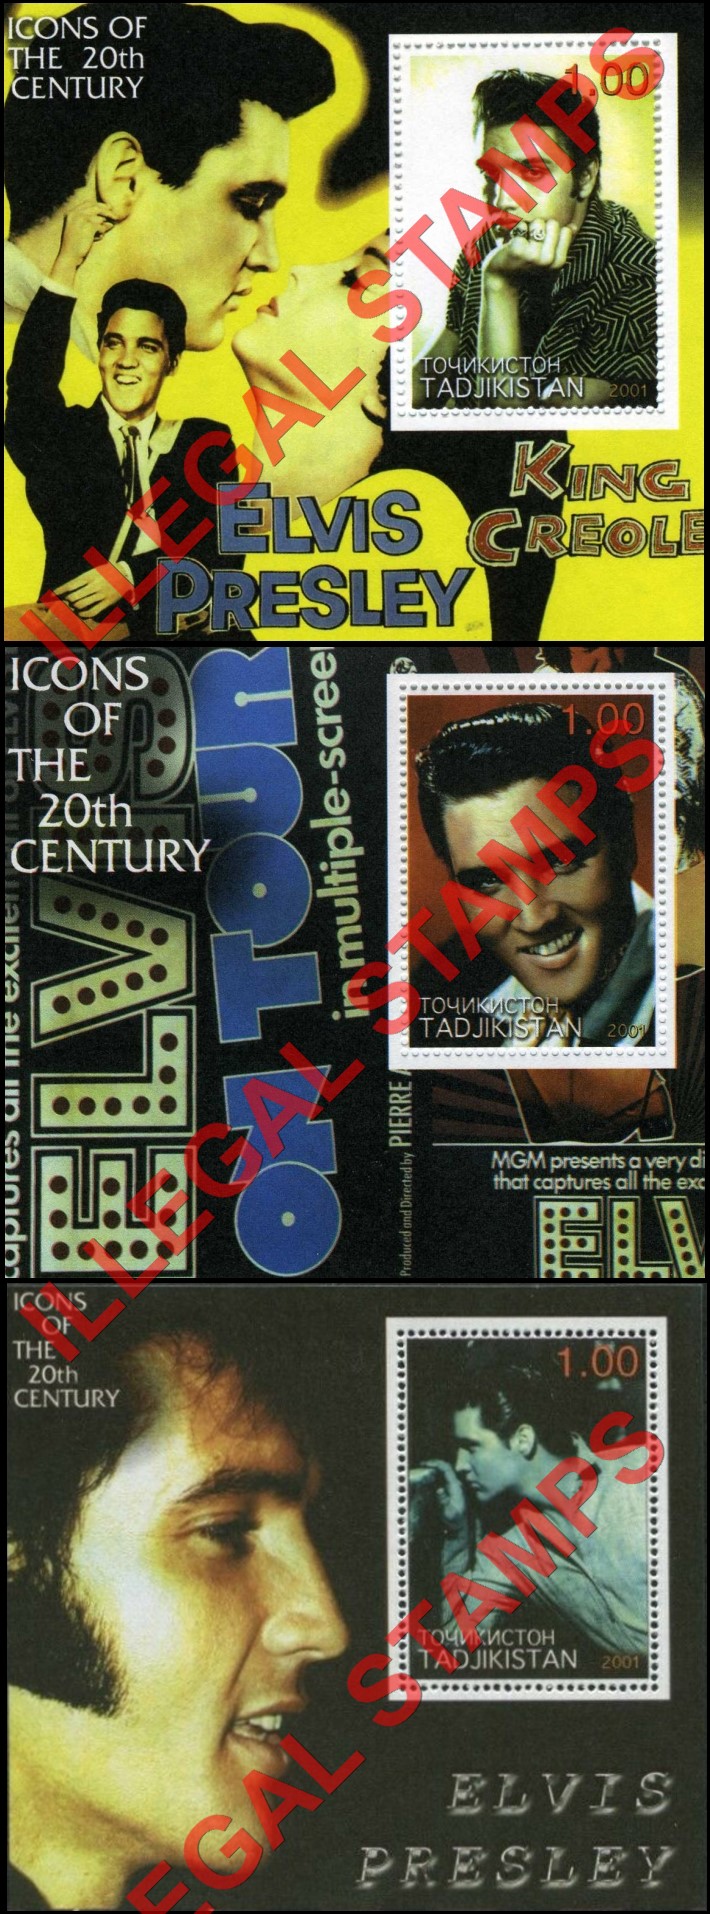 Tajikistan 2001 Elvis Presley Icons of the 20th Century Illegal Stamp Souvenir Sheets of 1